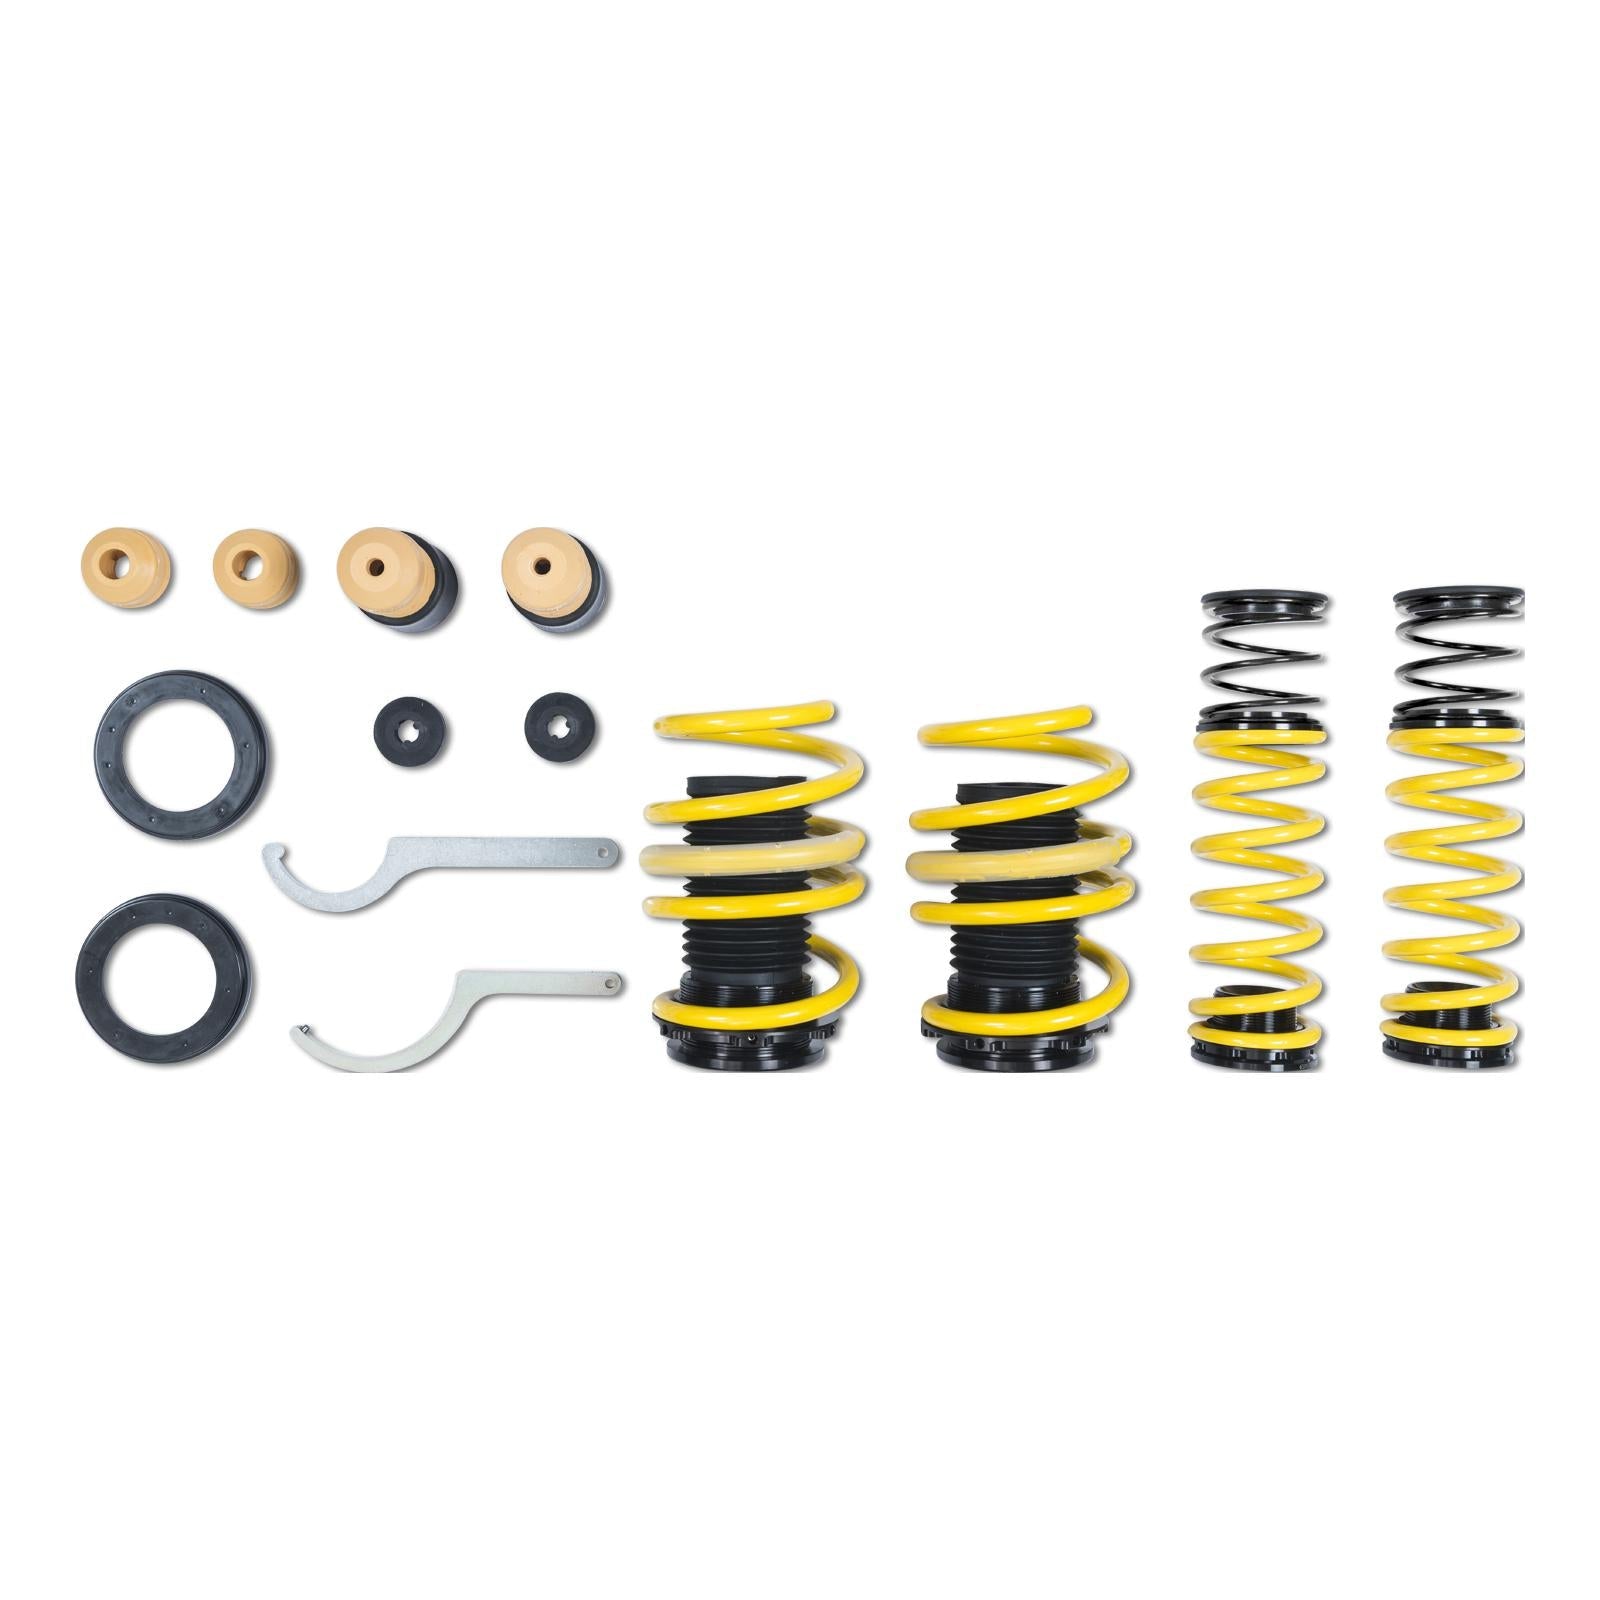 ST Suspensions Adjustable Lowering Springs - Audi B9 A5/S5 Convertible/Sportback AWD With EDC System